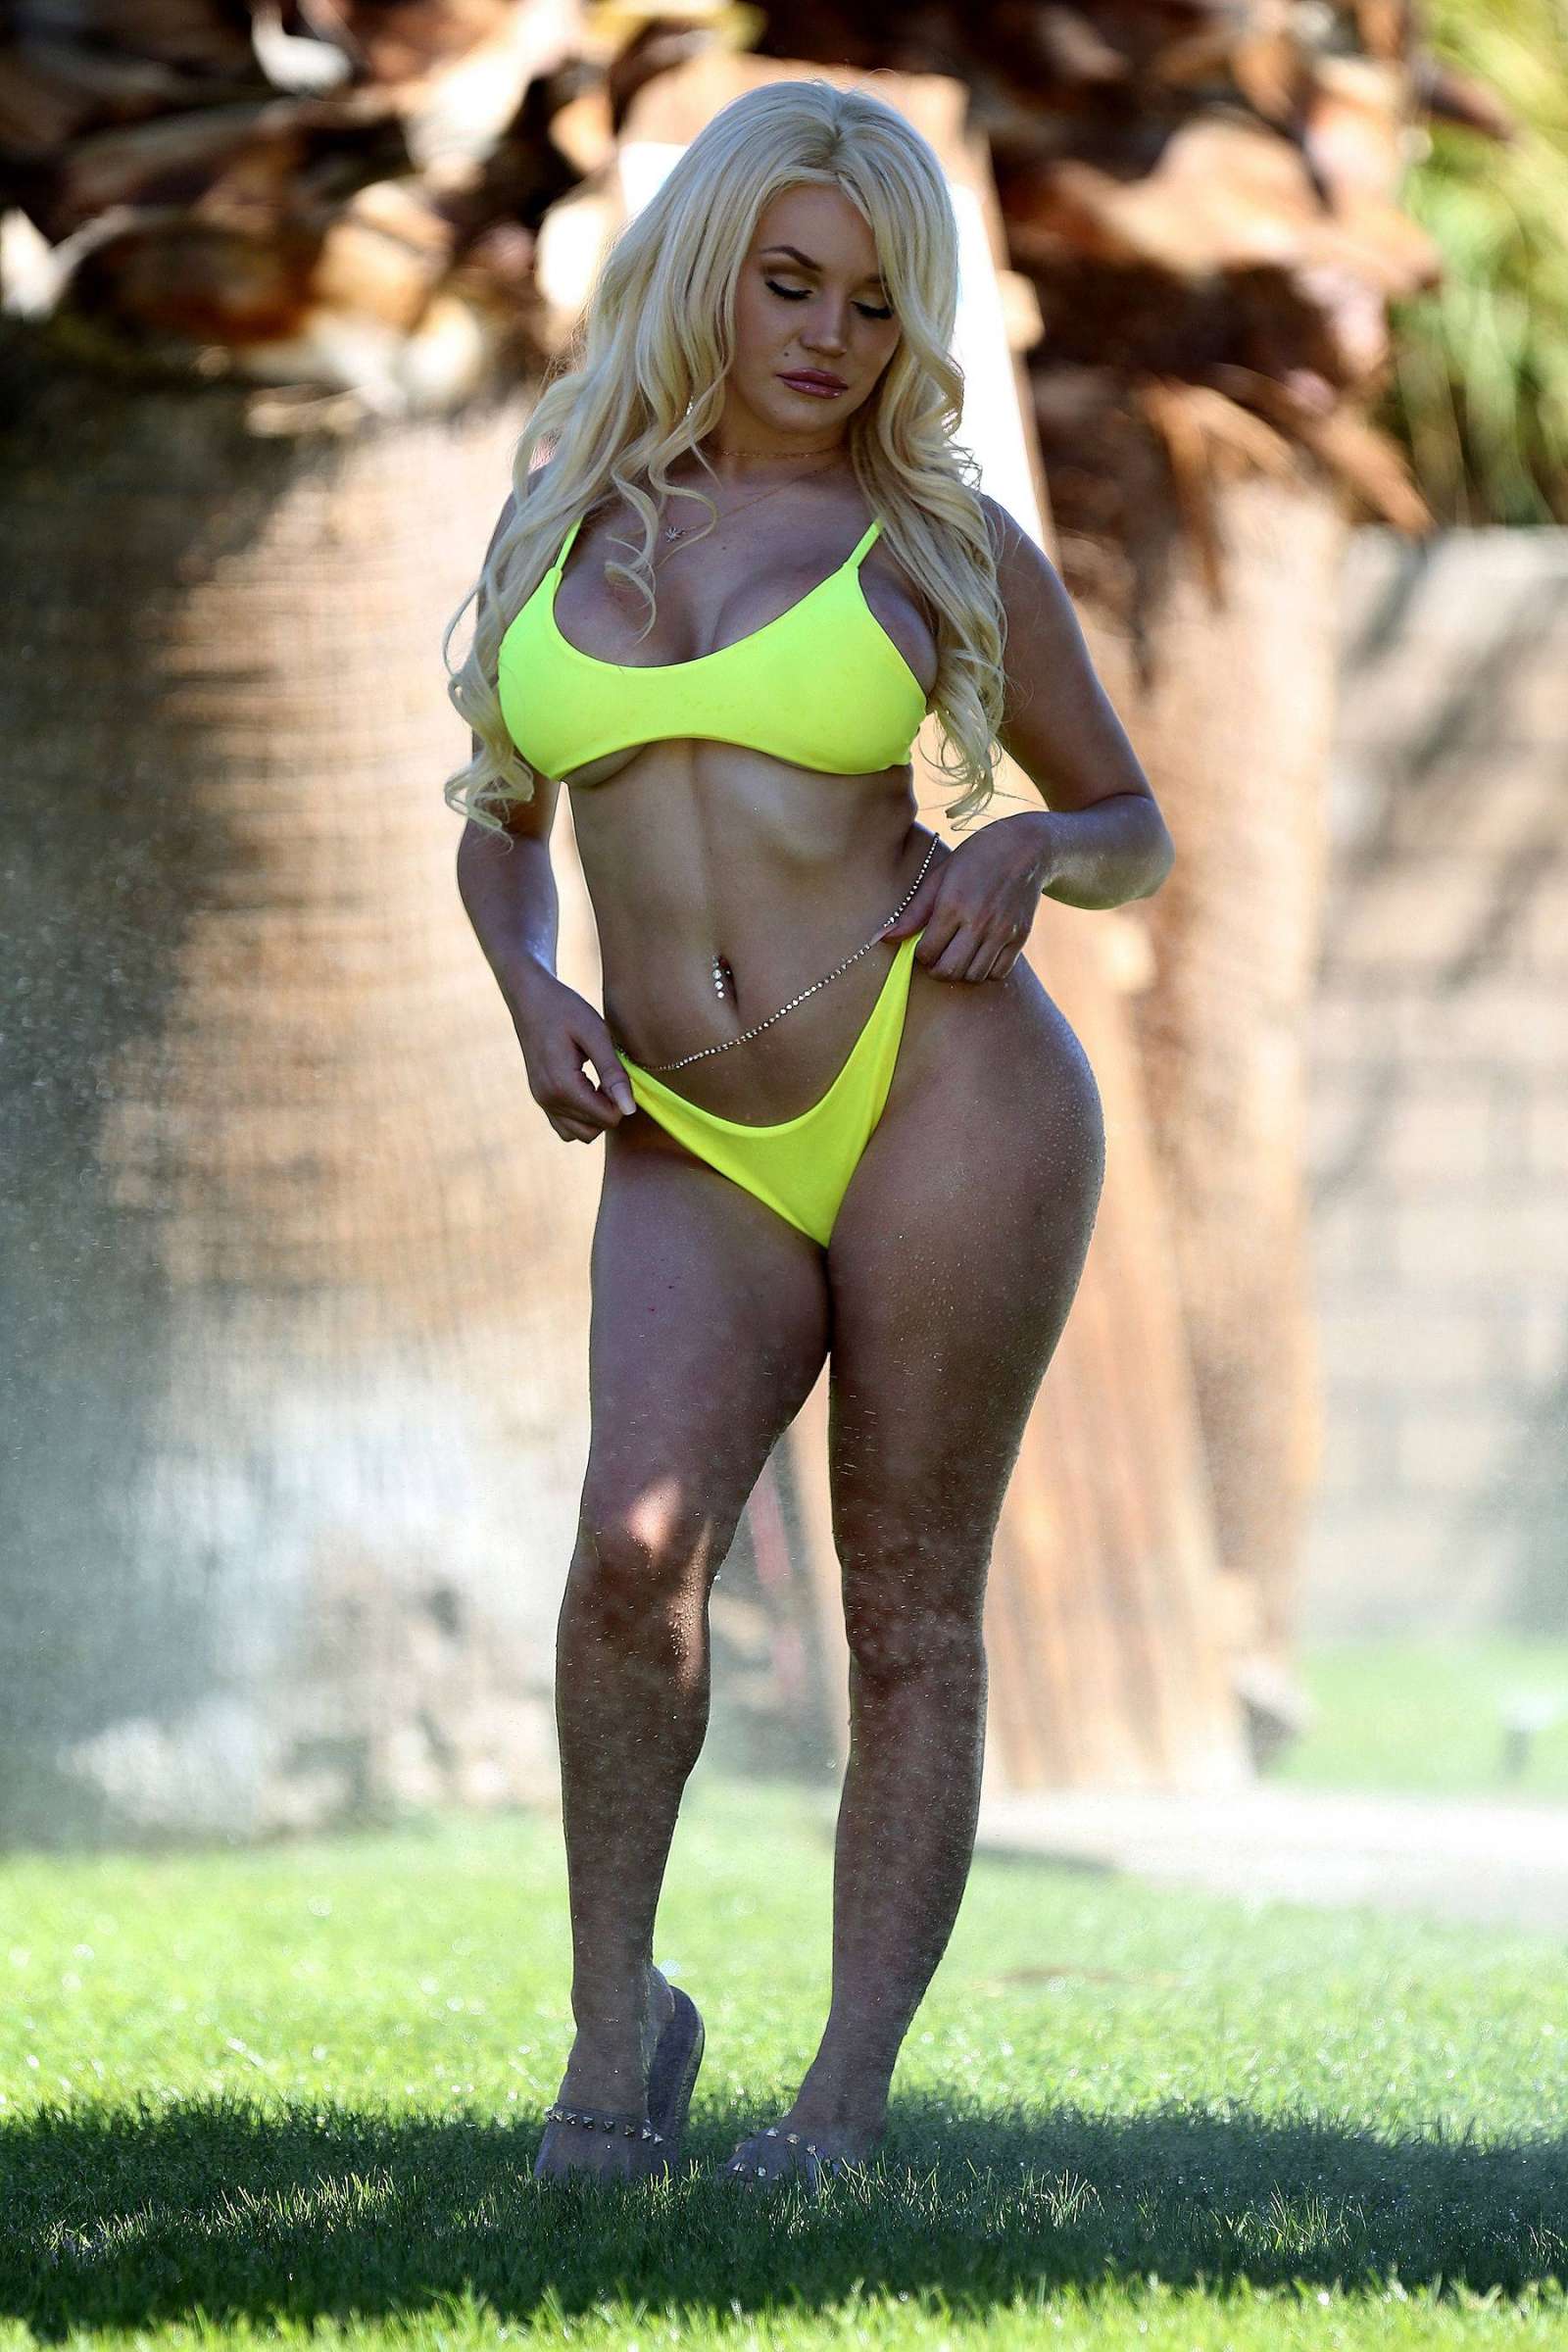 Courtney Stodden in Yellow Bikini at the pool in Palm Springs